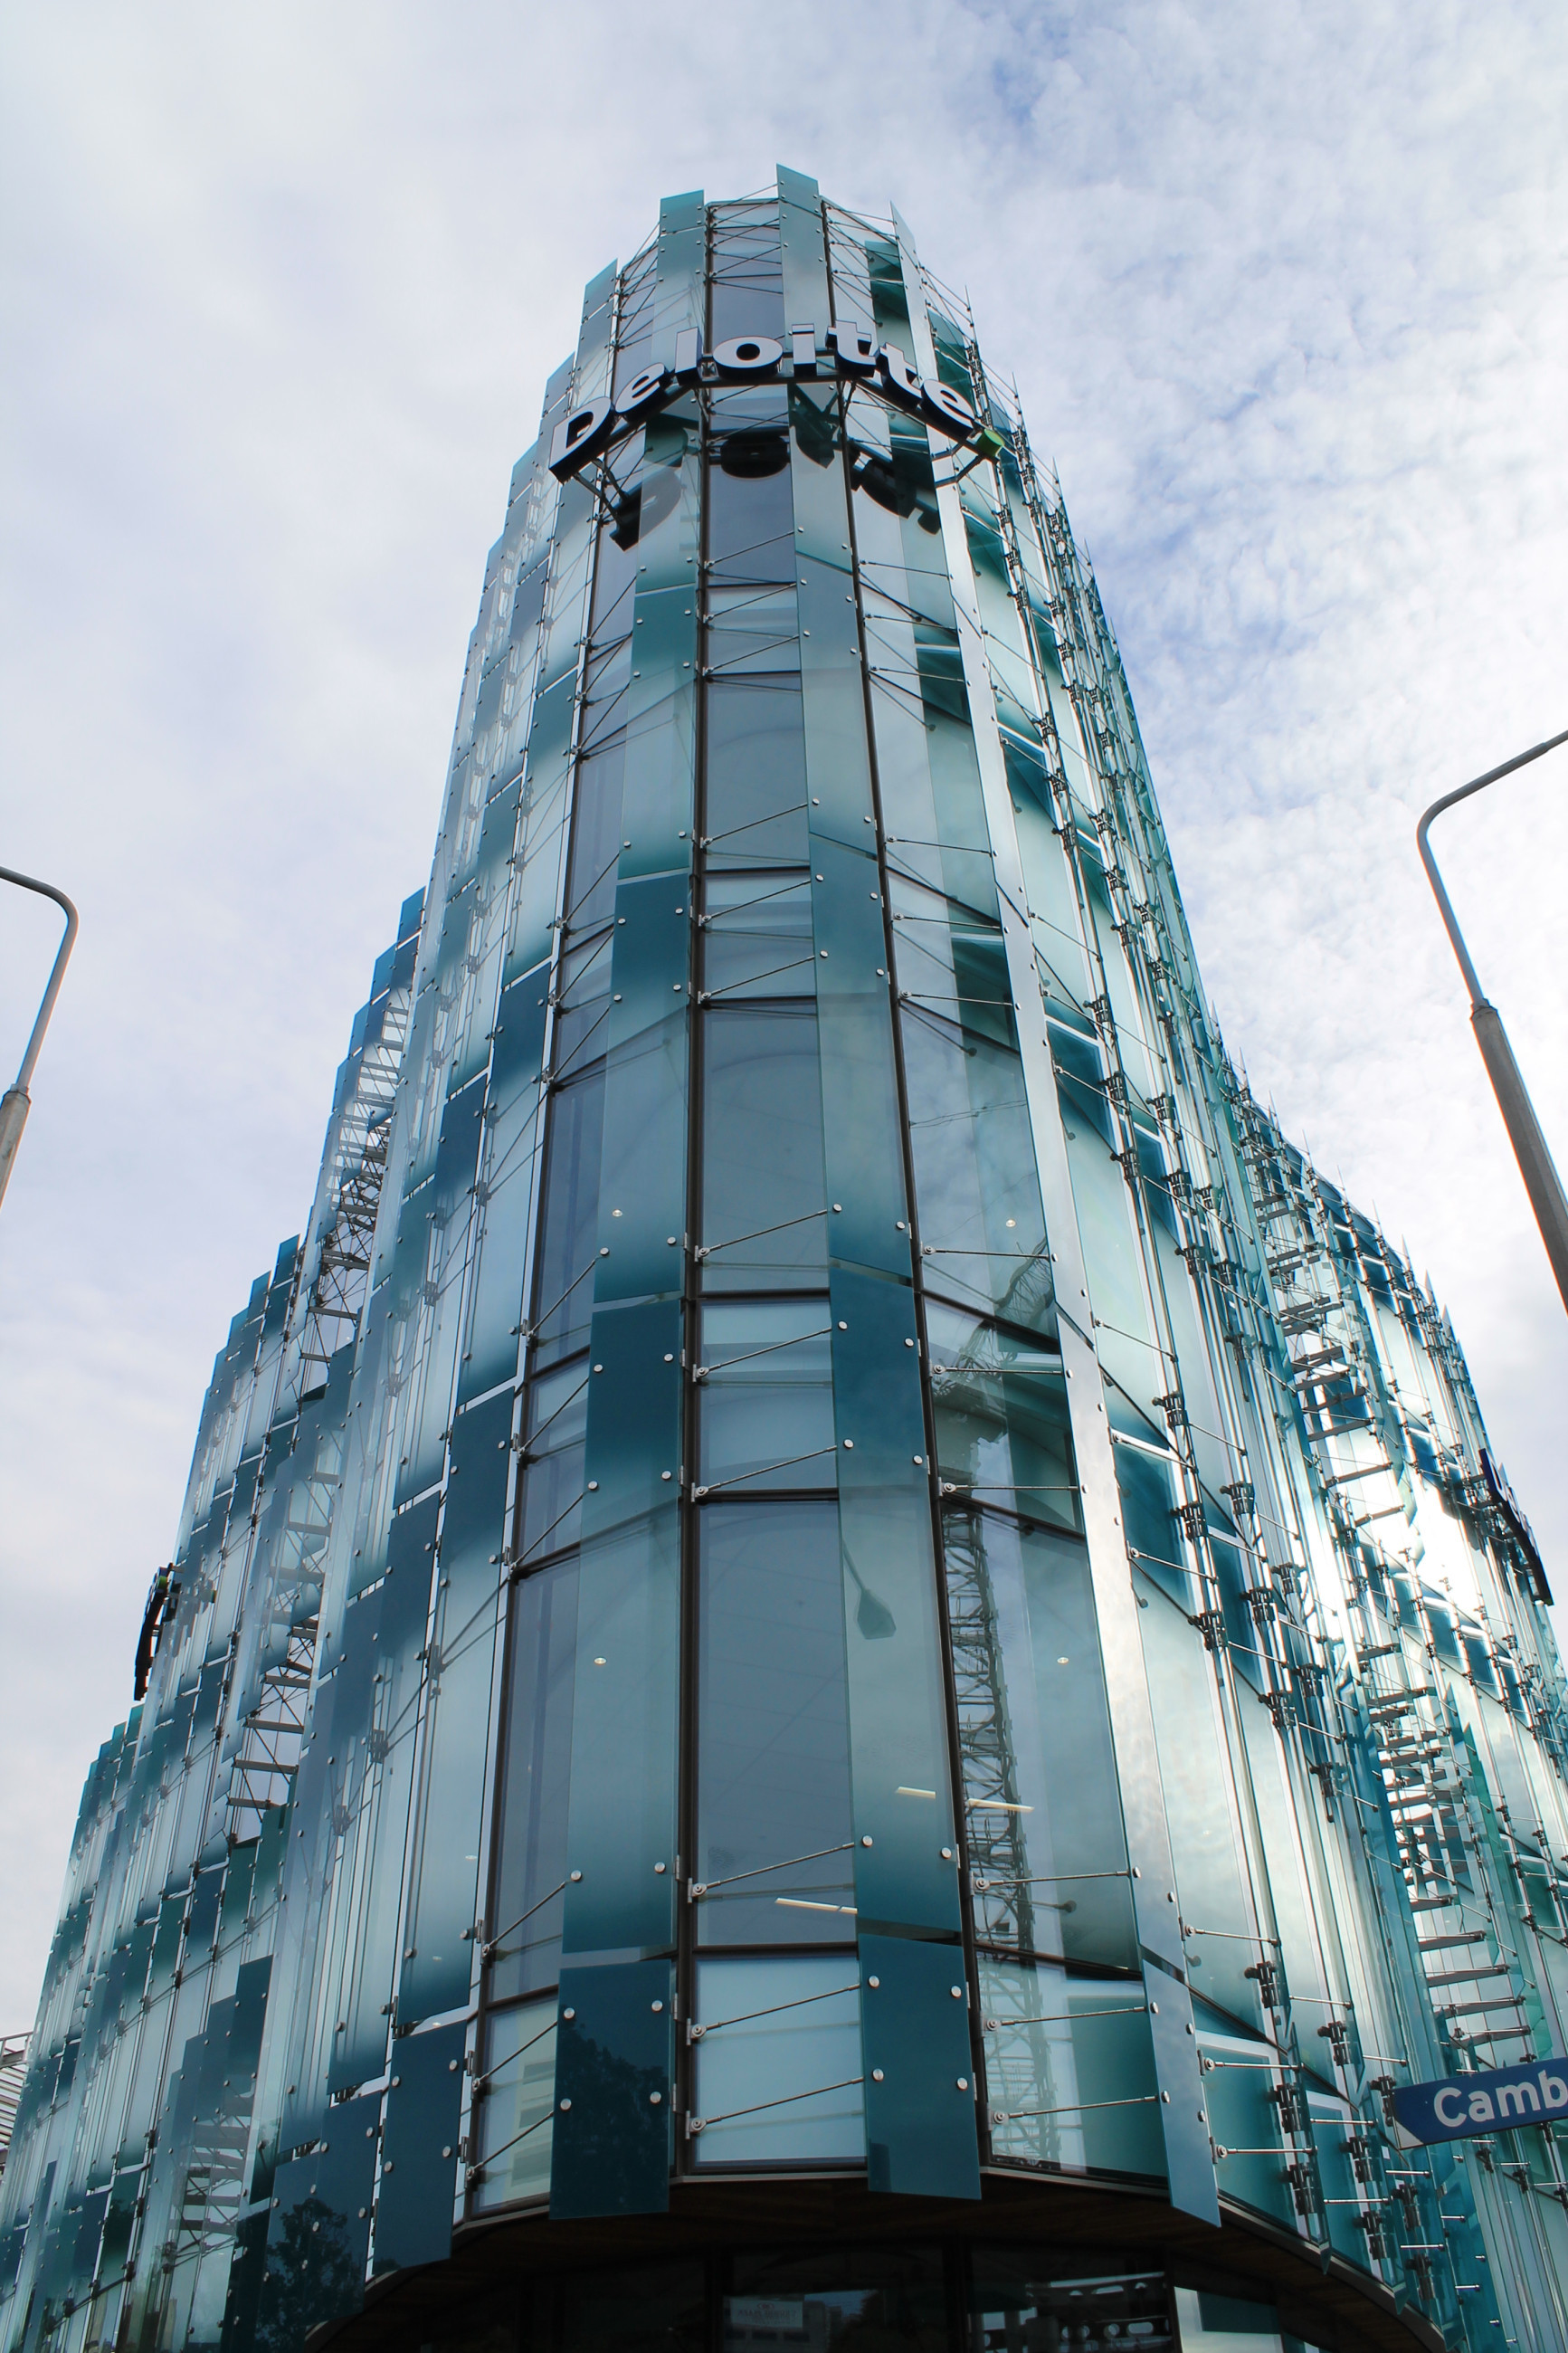 Modern tower with a geometric triangle design and protective glass canopies